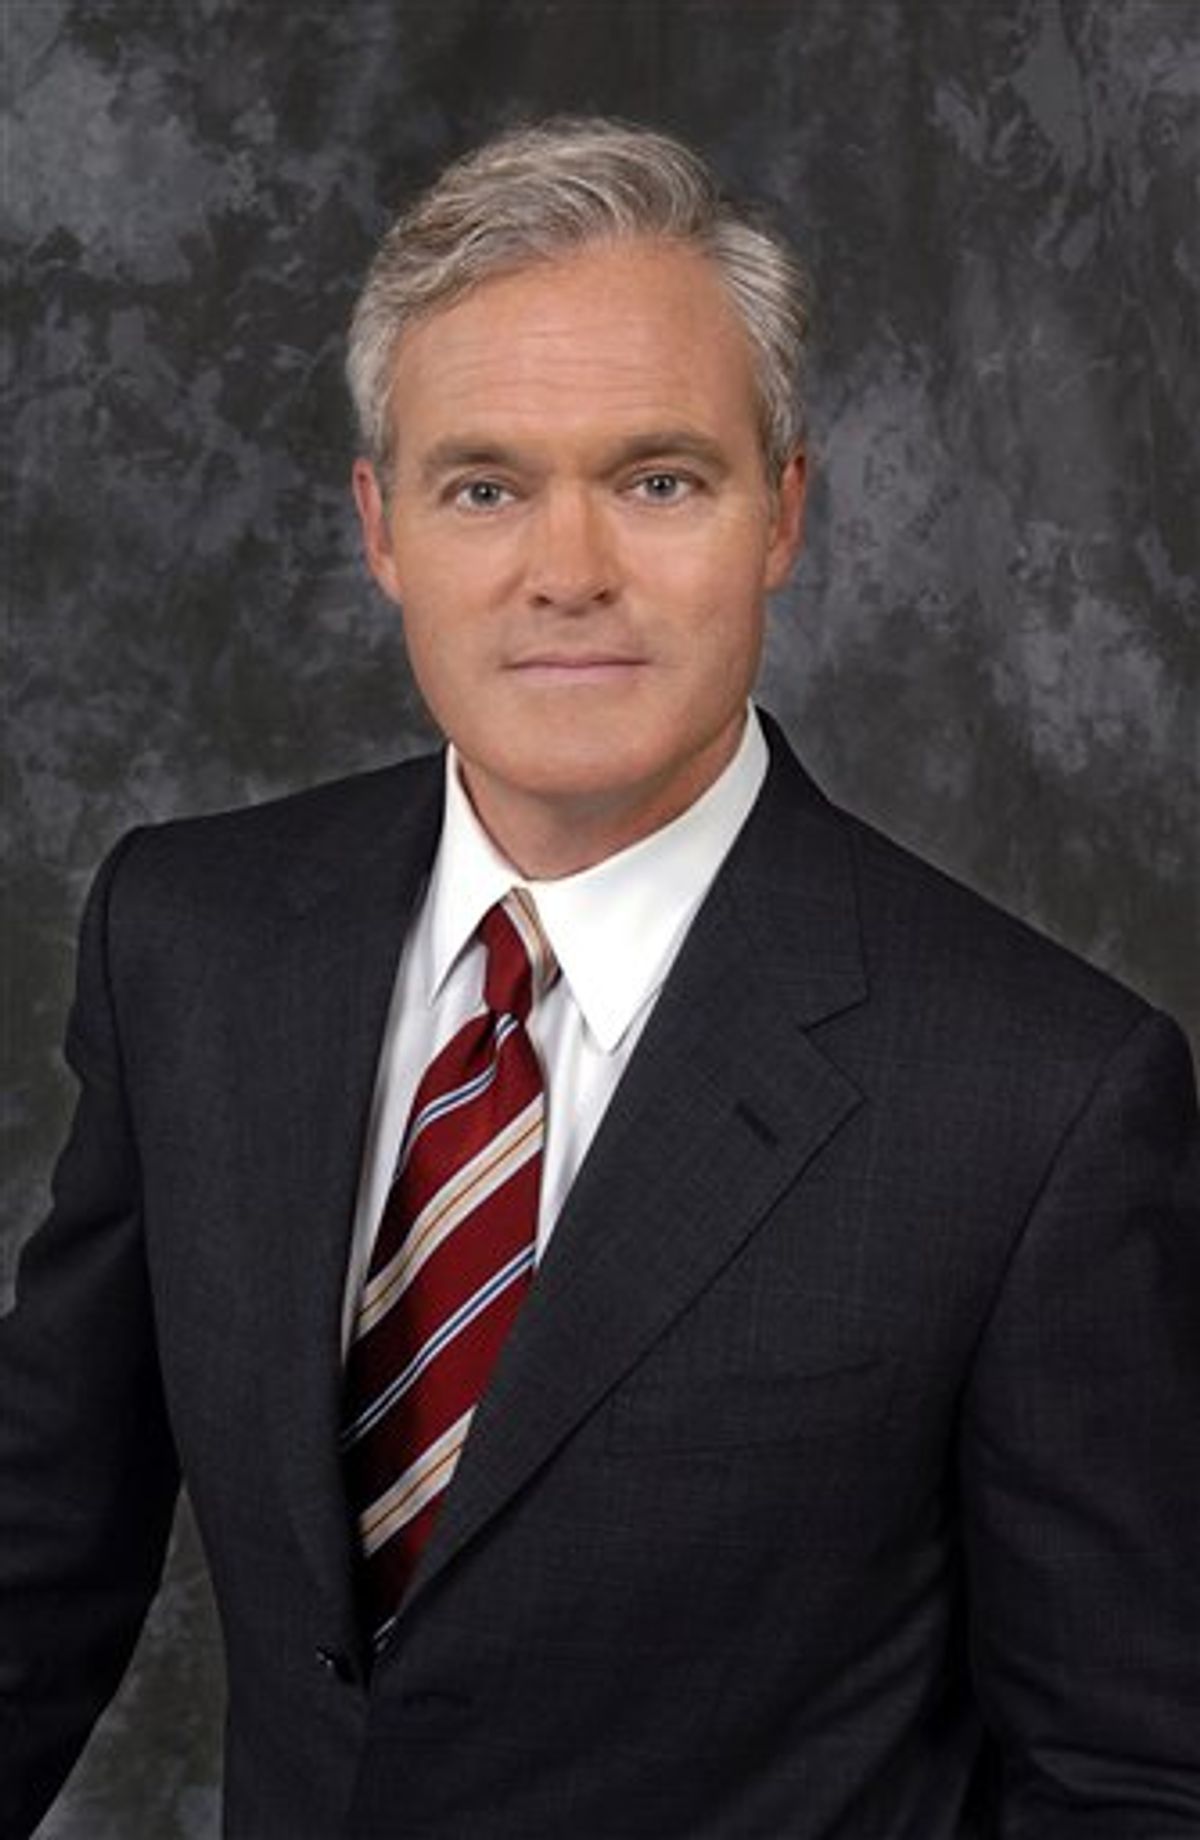 In this 2005 photo released by CBS, "60 Minutes" correspondent Scott Pelley, is shown. (AP Photo/CBS, John Filo) MANDATORY CREDIT; NO ARCHIVE; NO SALES; FOR NORTH AMERICAN USE ONLY. (AP)